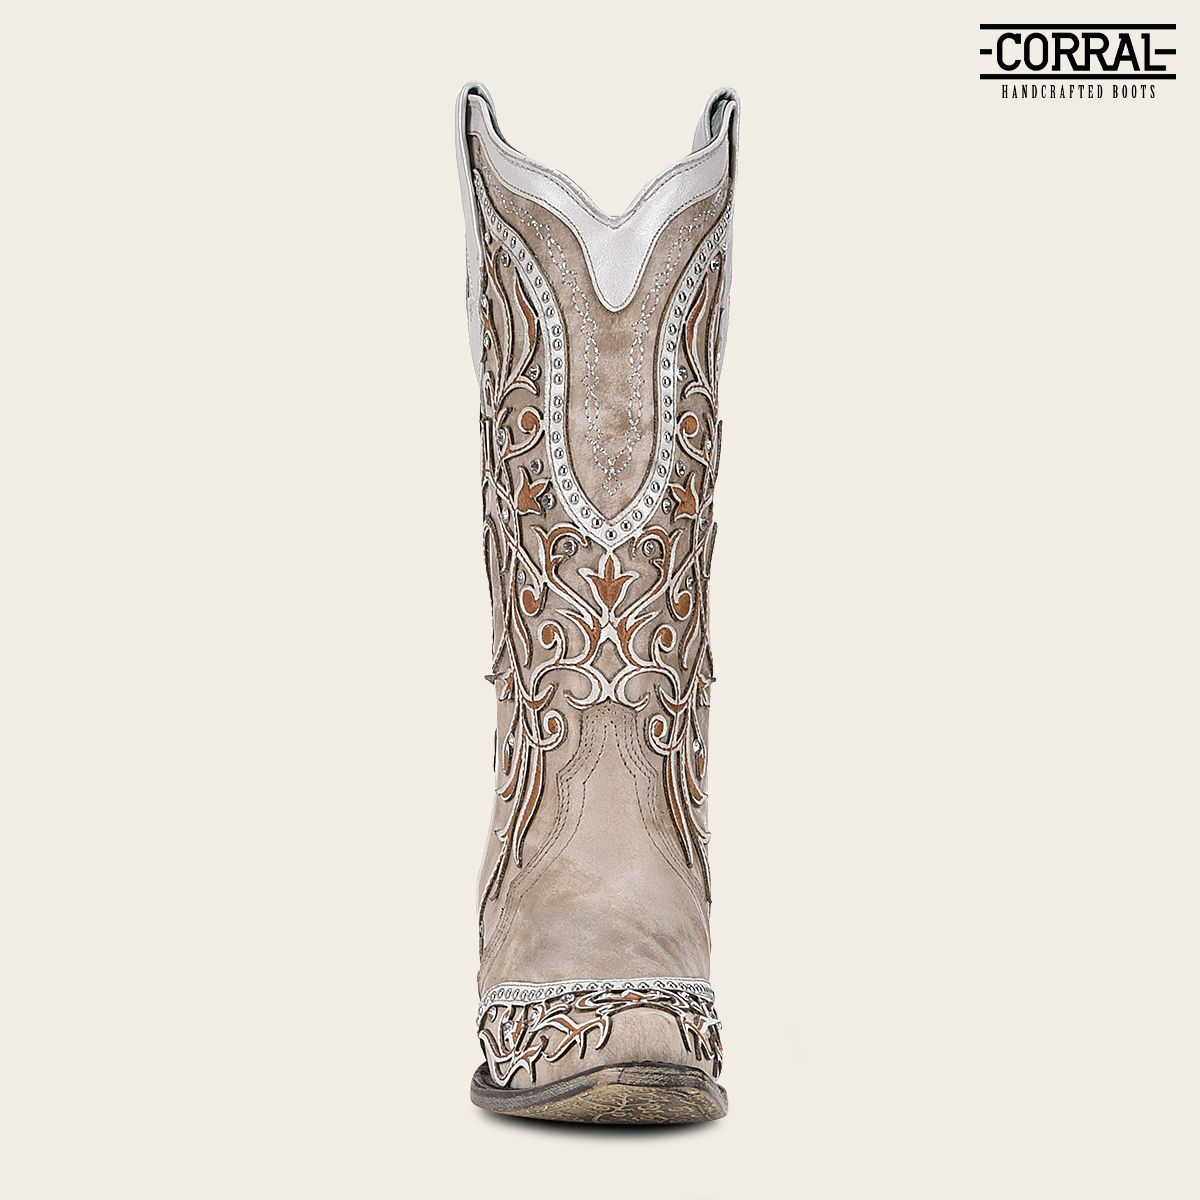 A3837 - Corral white cowgirl western leather floral inlay boots for women-Kuet.us